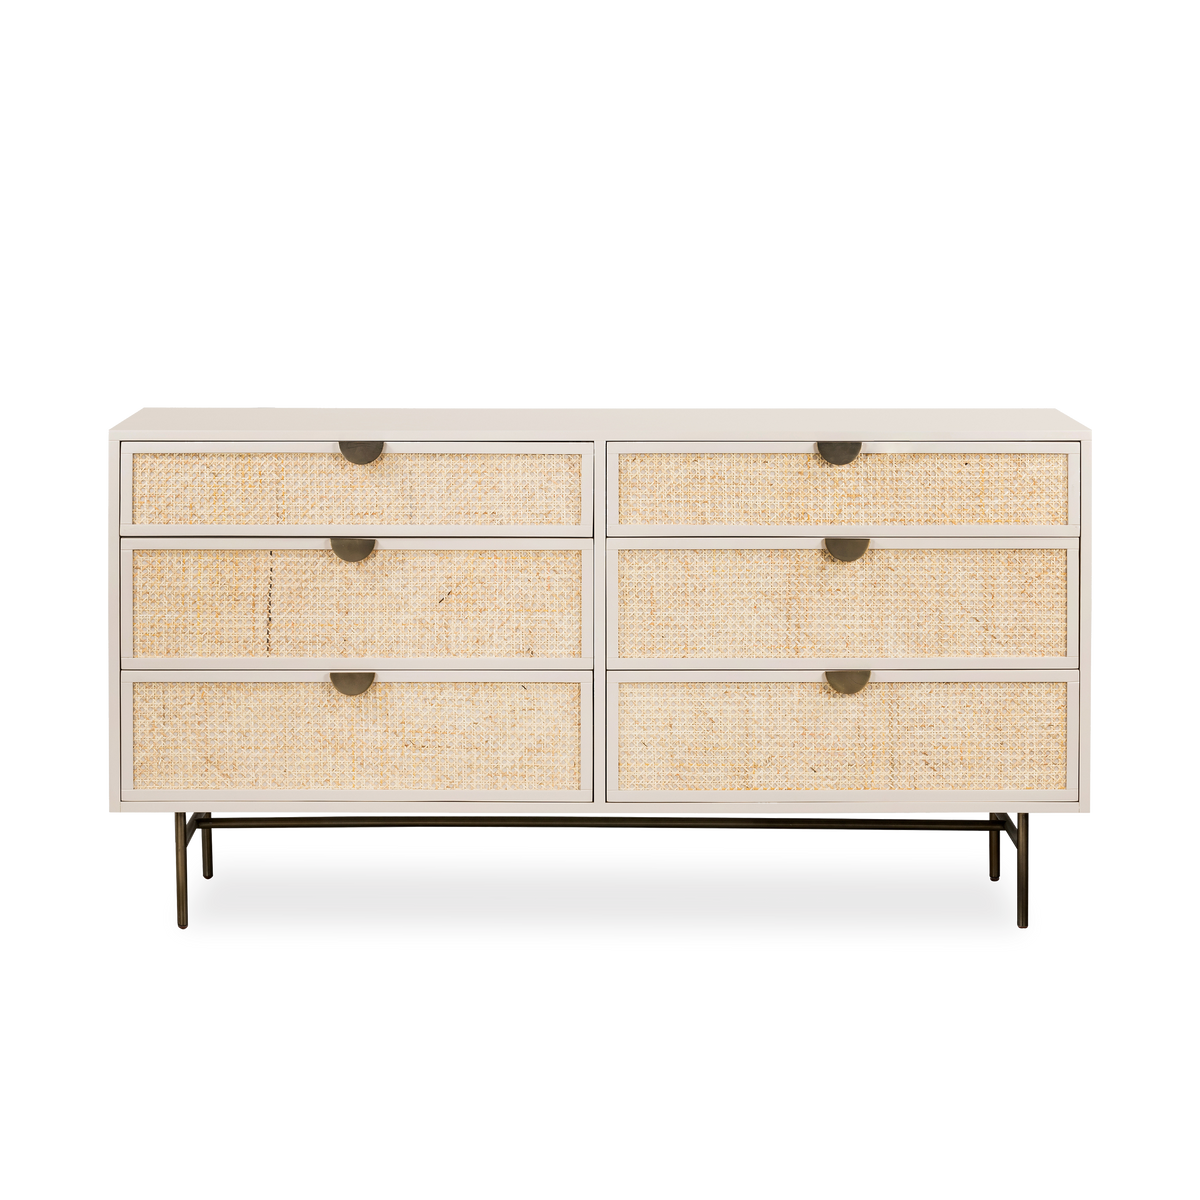 Bright and nonchalant, the Ingram Dresser brings a light look to bedroom styling.